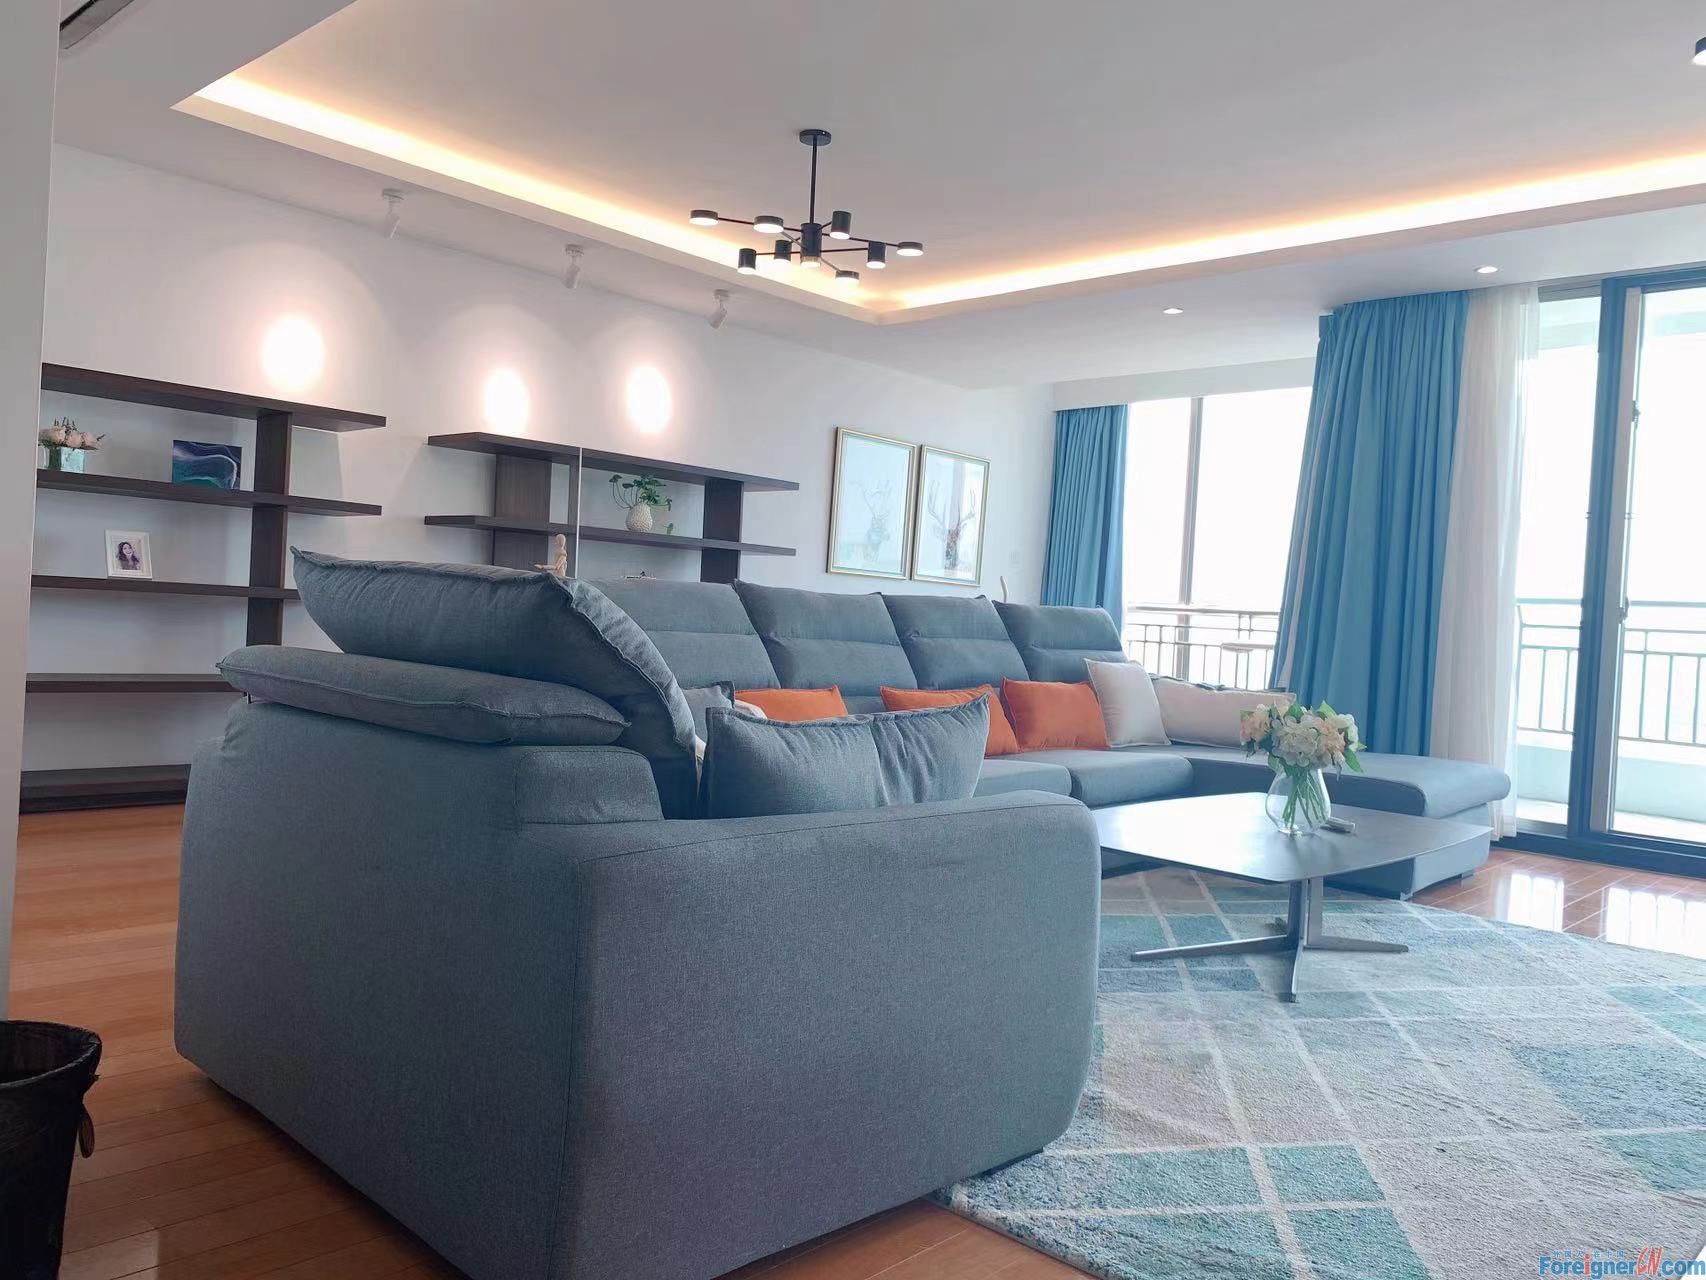 Excellent！!! A house to rent in Suzhou/ 3 bedrooms and 2 bathrooms/Modern style /Big balcony /a lot of light/Subway station nearby/Camel Bar 